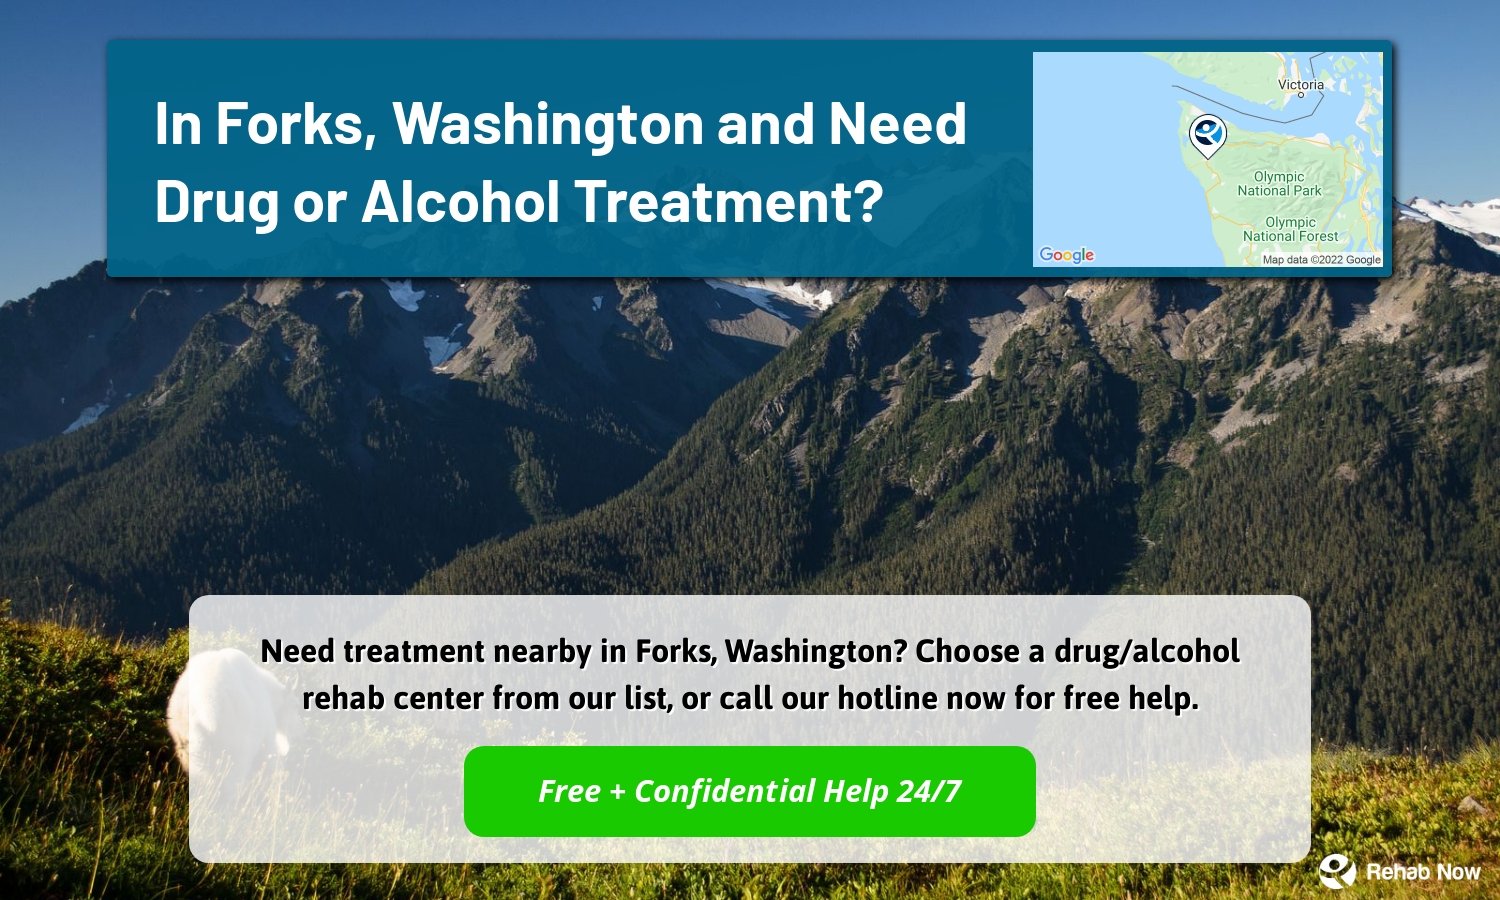 Need treatment nearby in Forks, Washington? Choose a drug/alcohol rehab center from our list, or call our hotline now for free help.